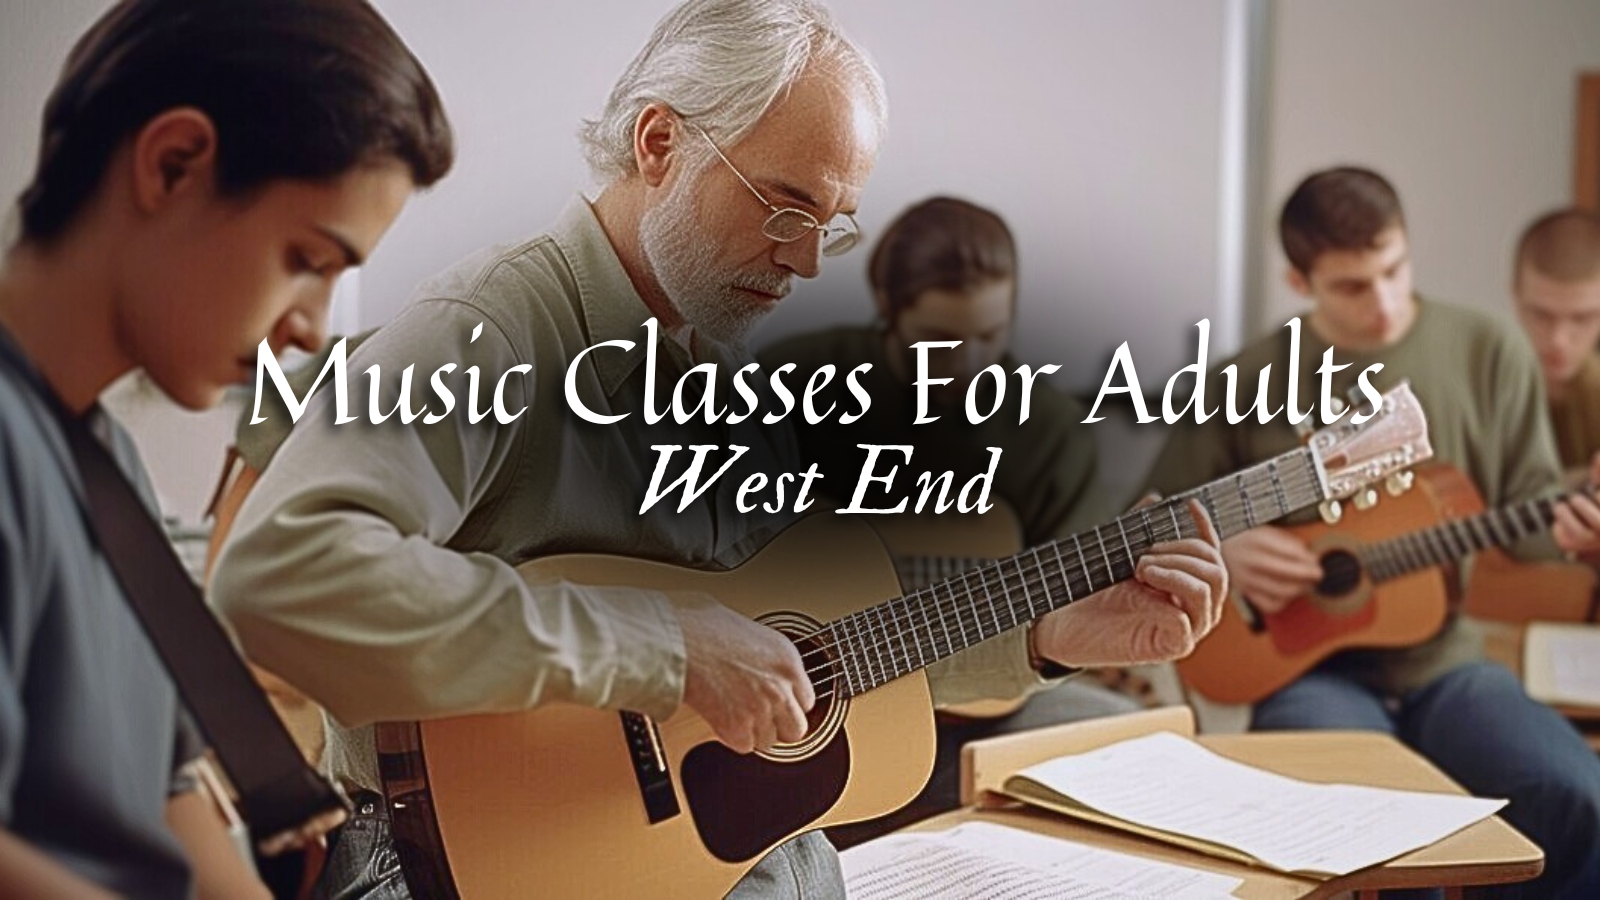 Music Classes for Adults in West End, Massachusetts: Unlock Your Musical Potential at Musicians Playground